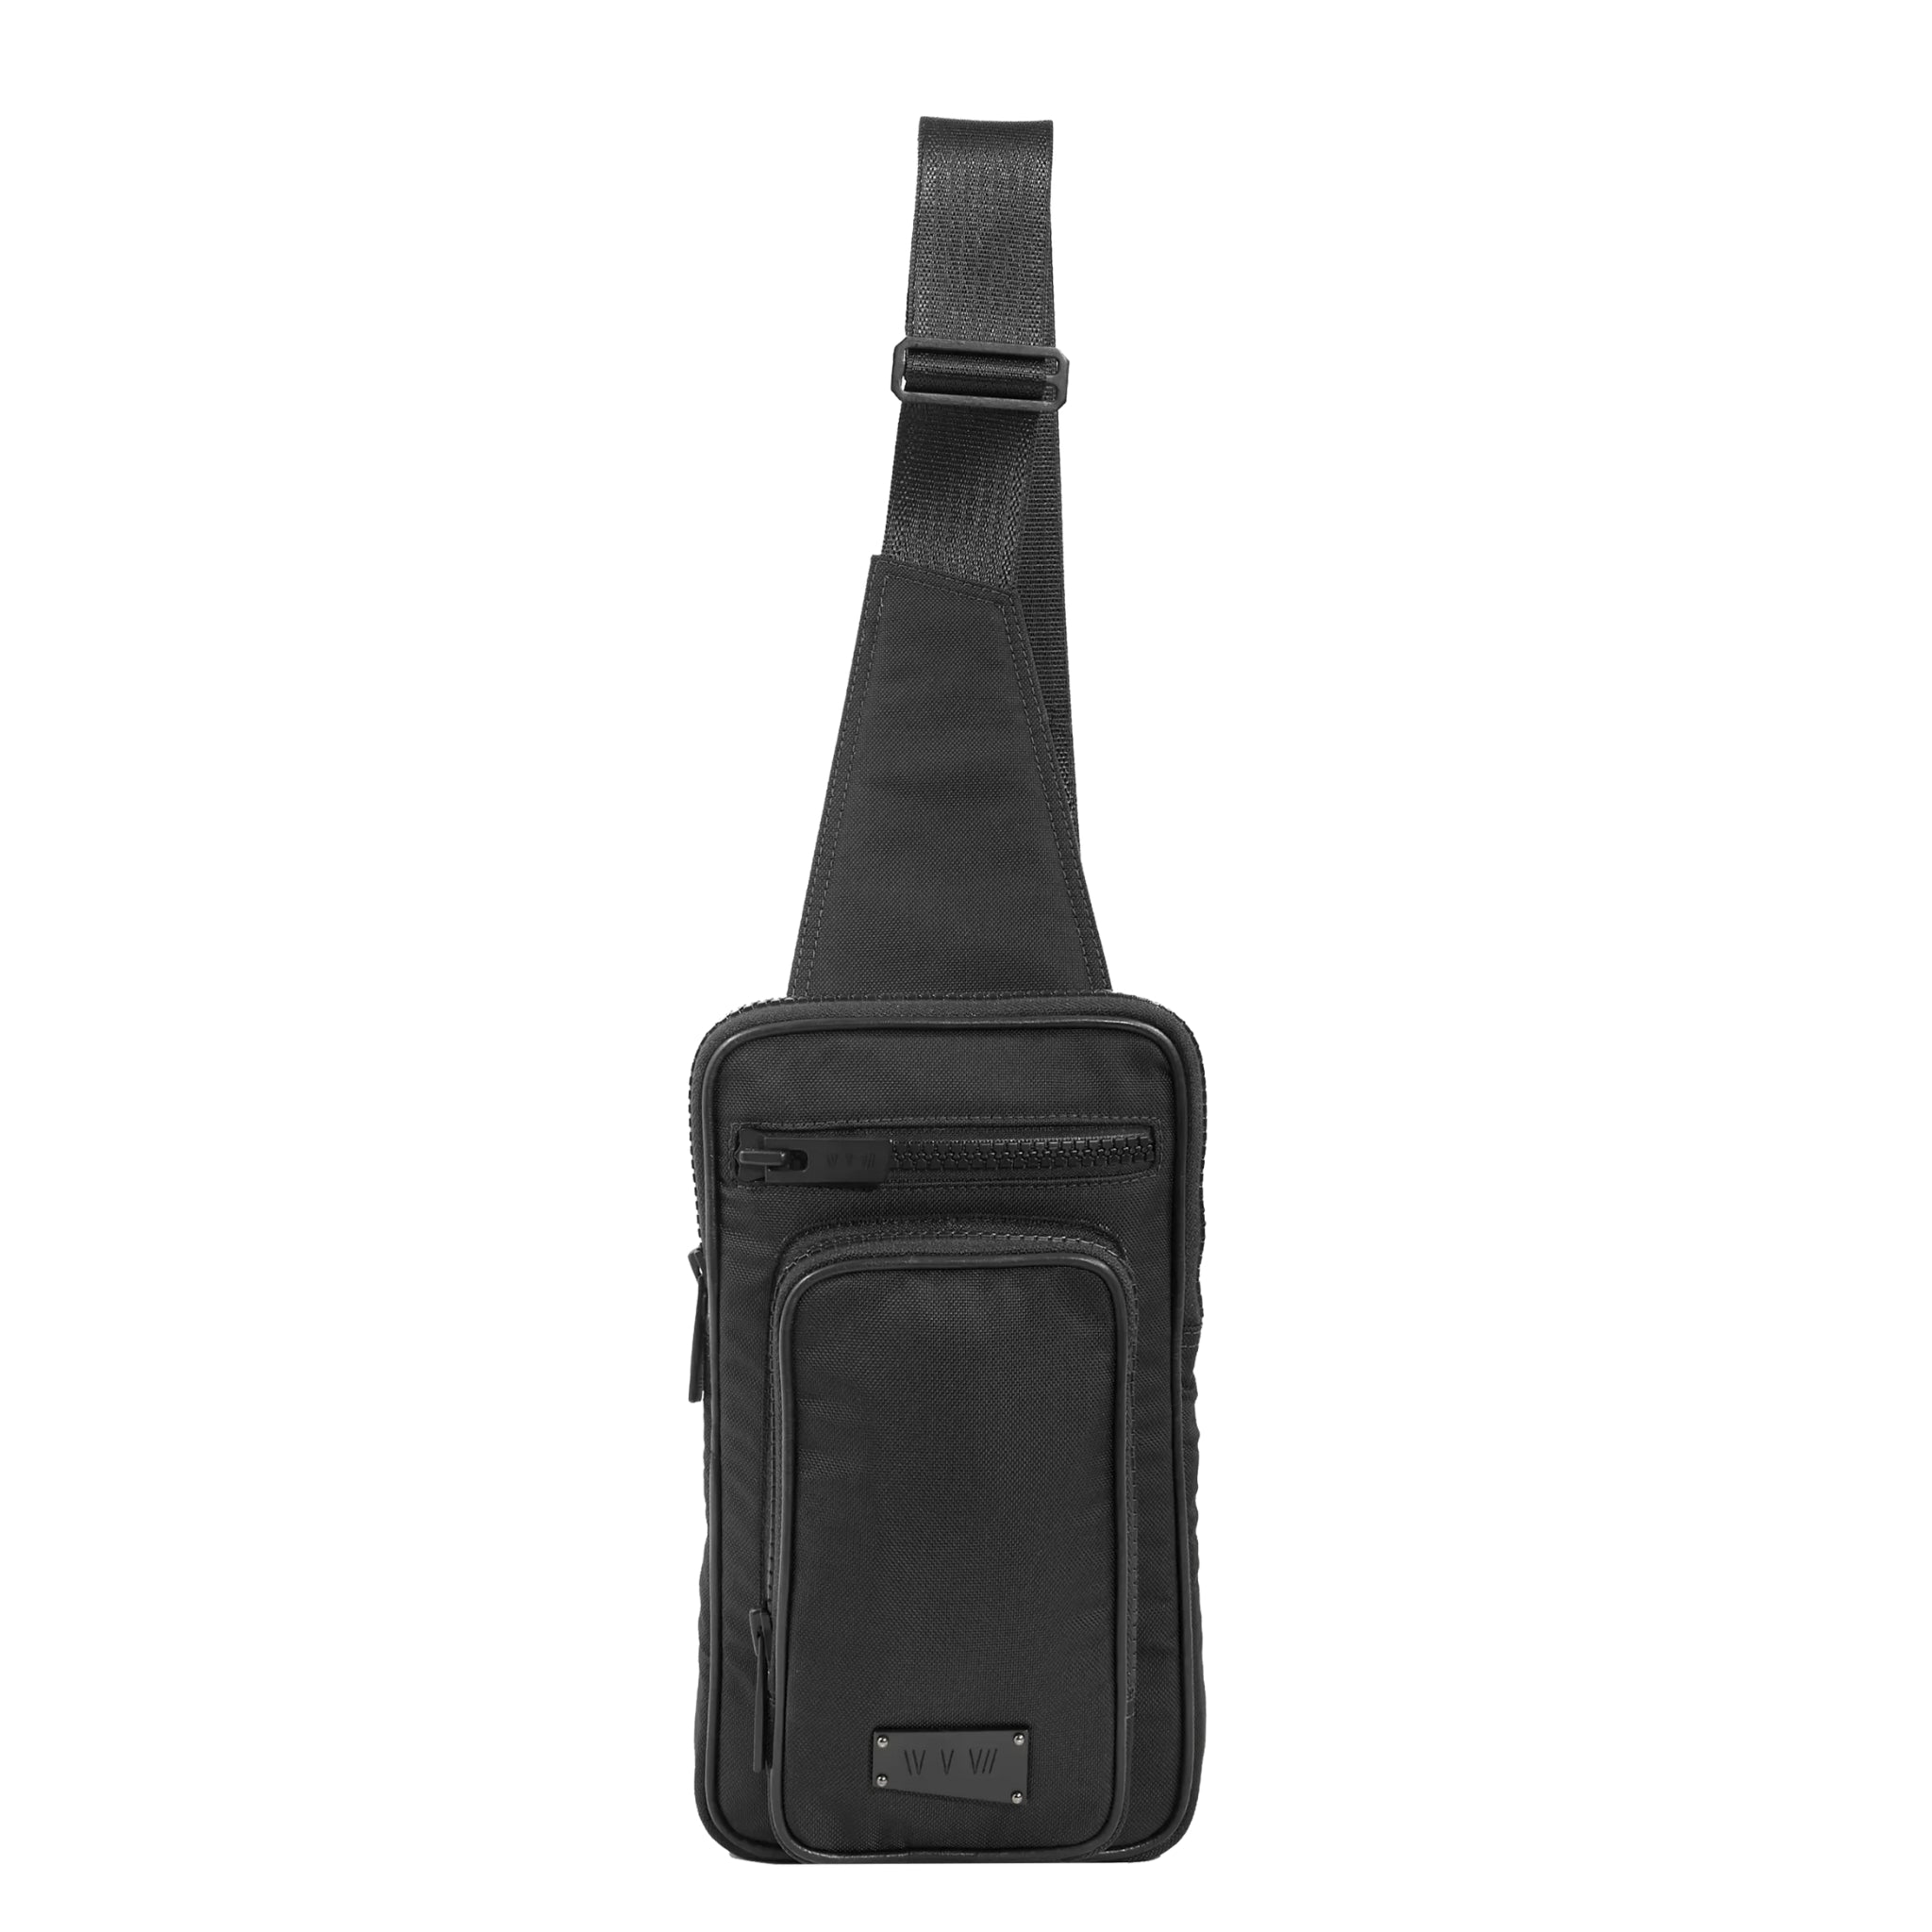 Face view of a utilitarian style sling in black upcycled nylon material on a white background.